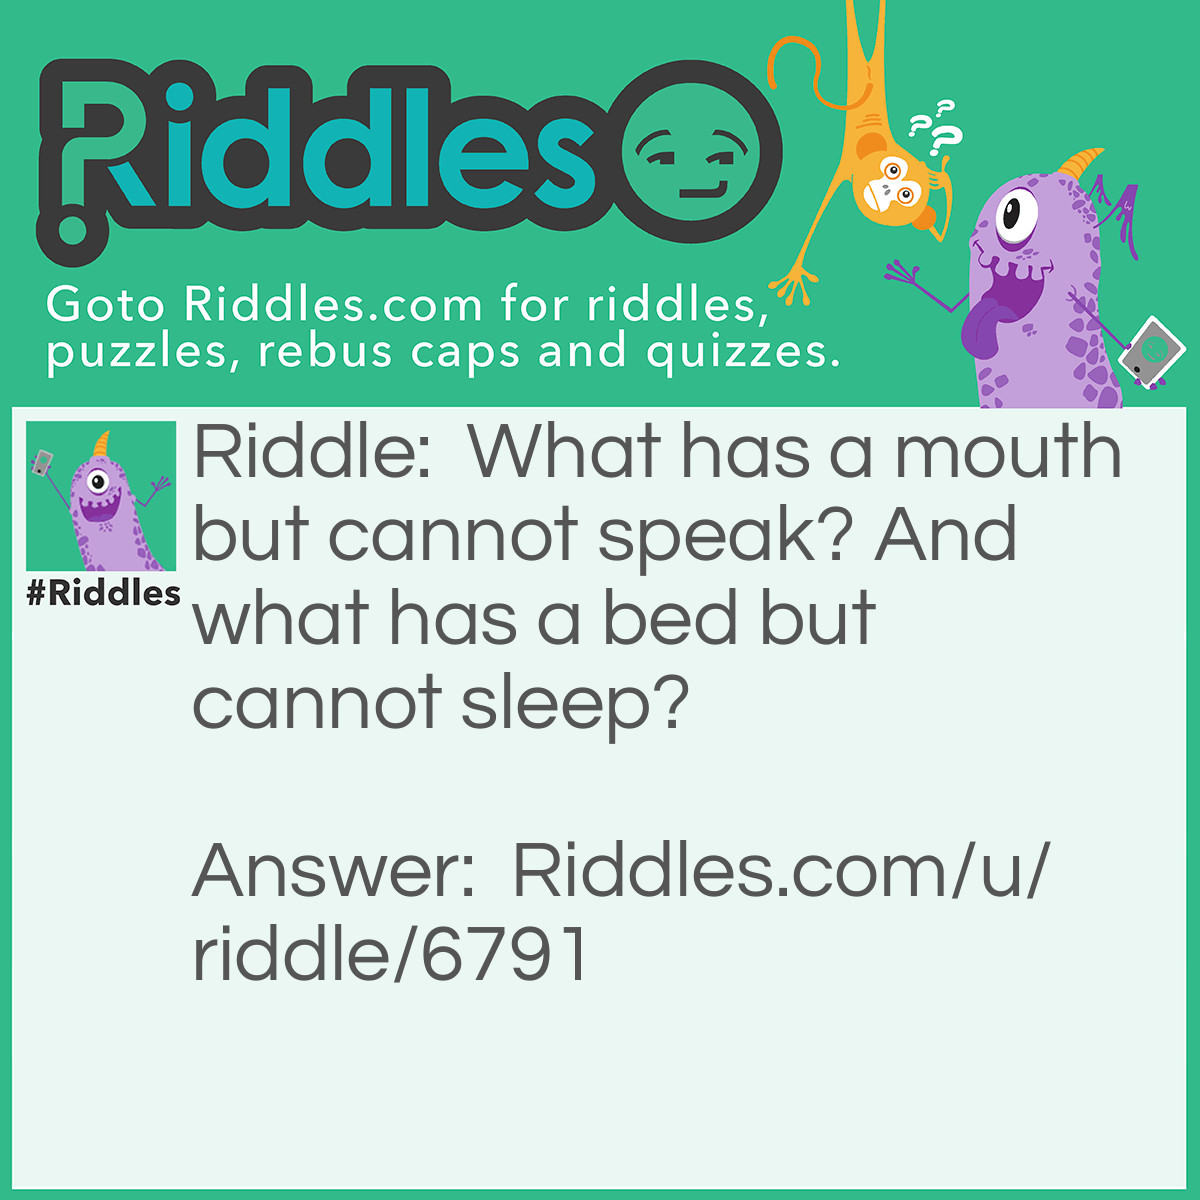 Riddle: What has a mouth but cannot speak? And what has a bed but cannot sleep? Answer: A River.